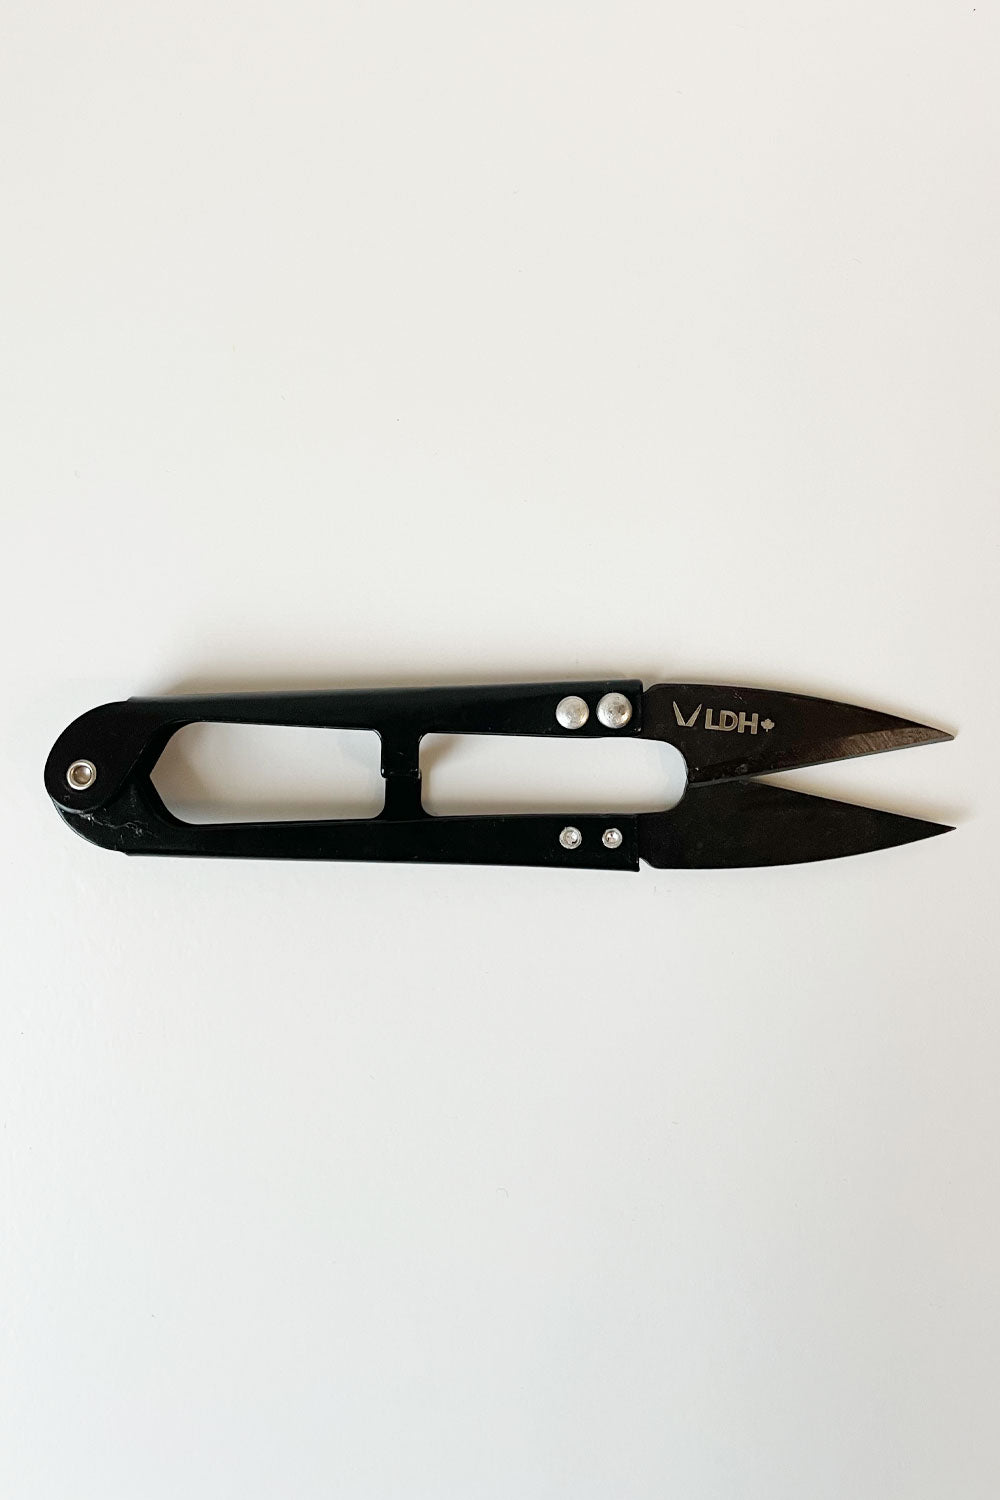 One thread snips lying horizontally. The handles are slightly shiny and black; the blades are dark grey. LDH logo on the top blade. 